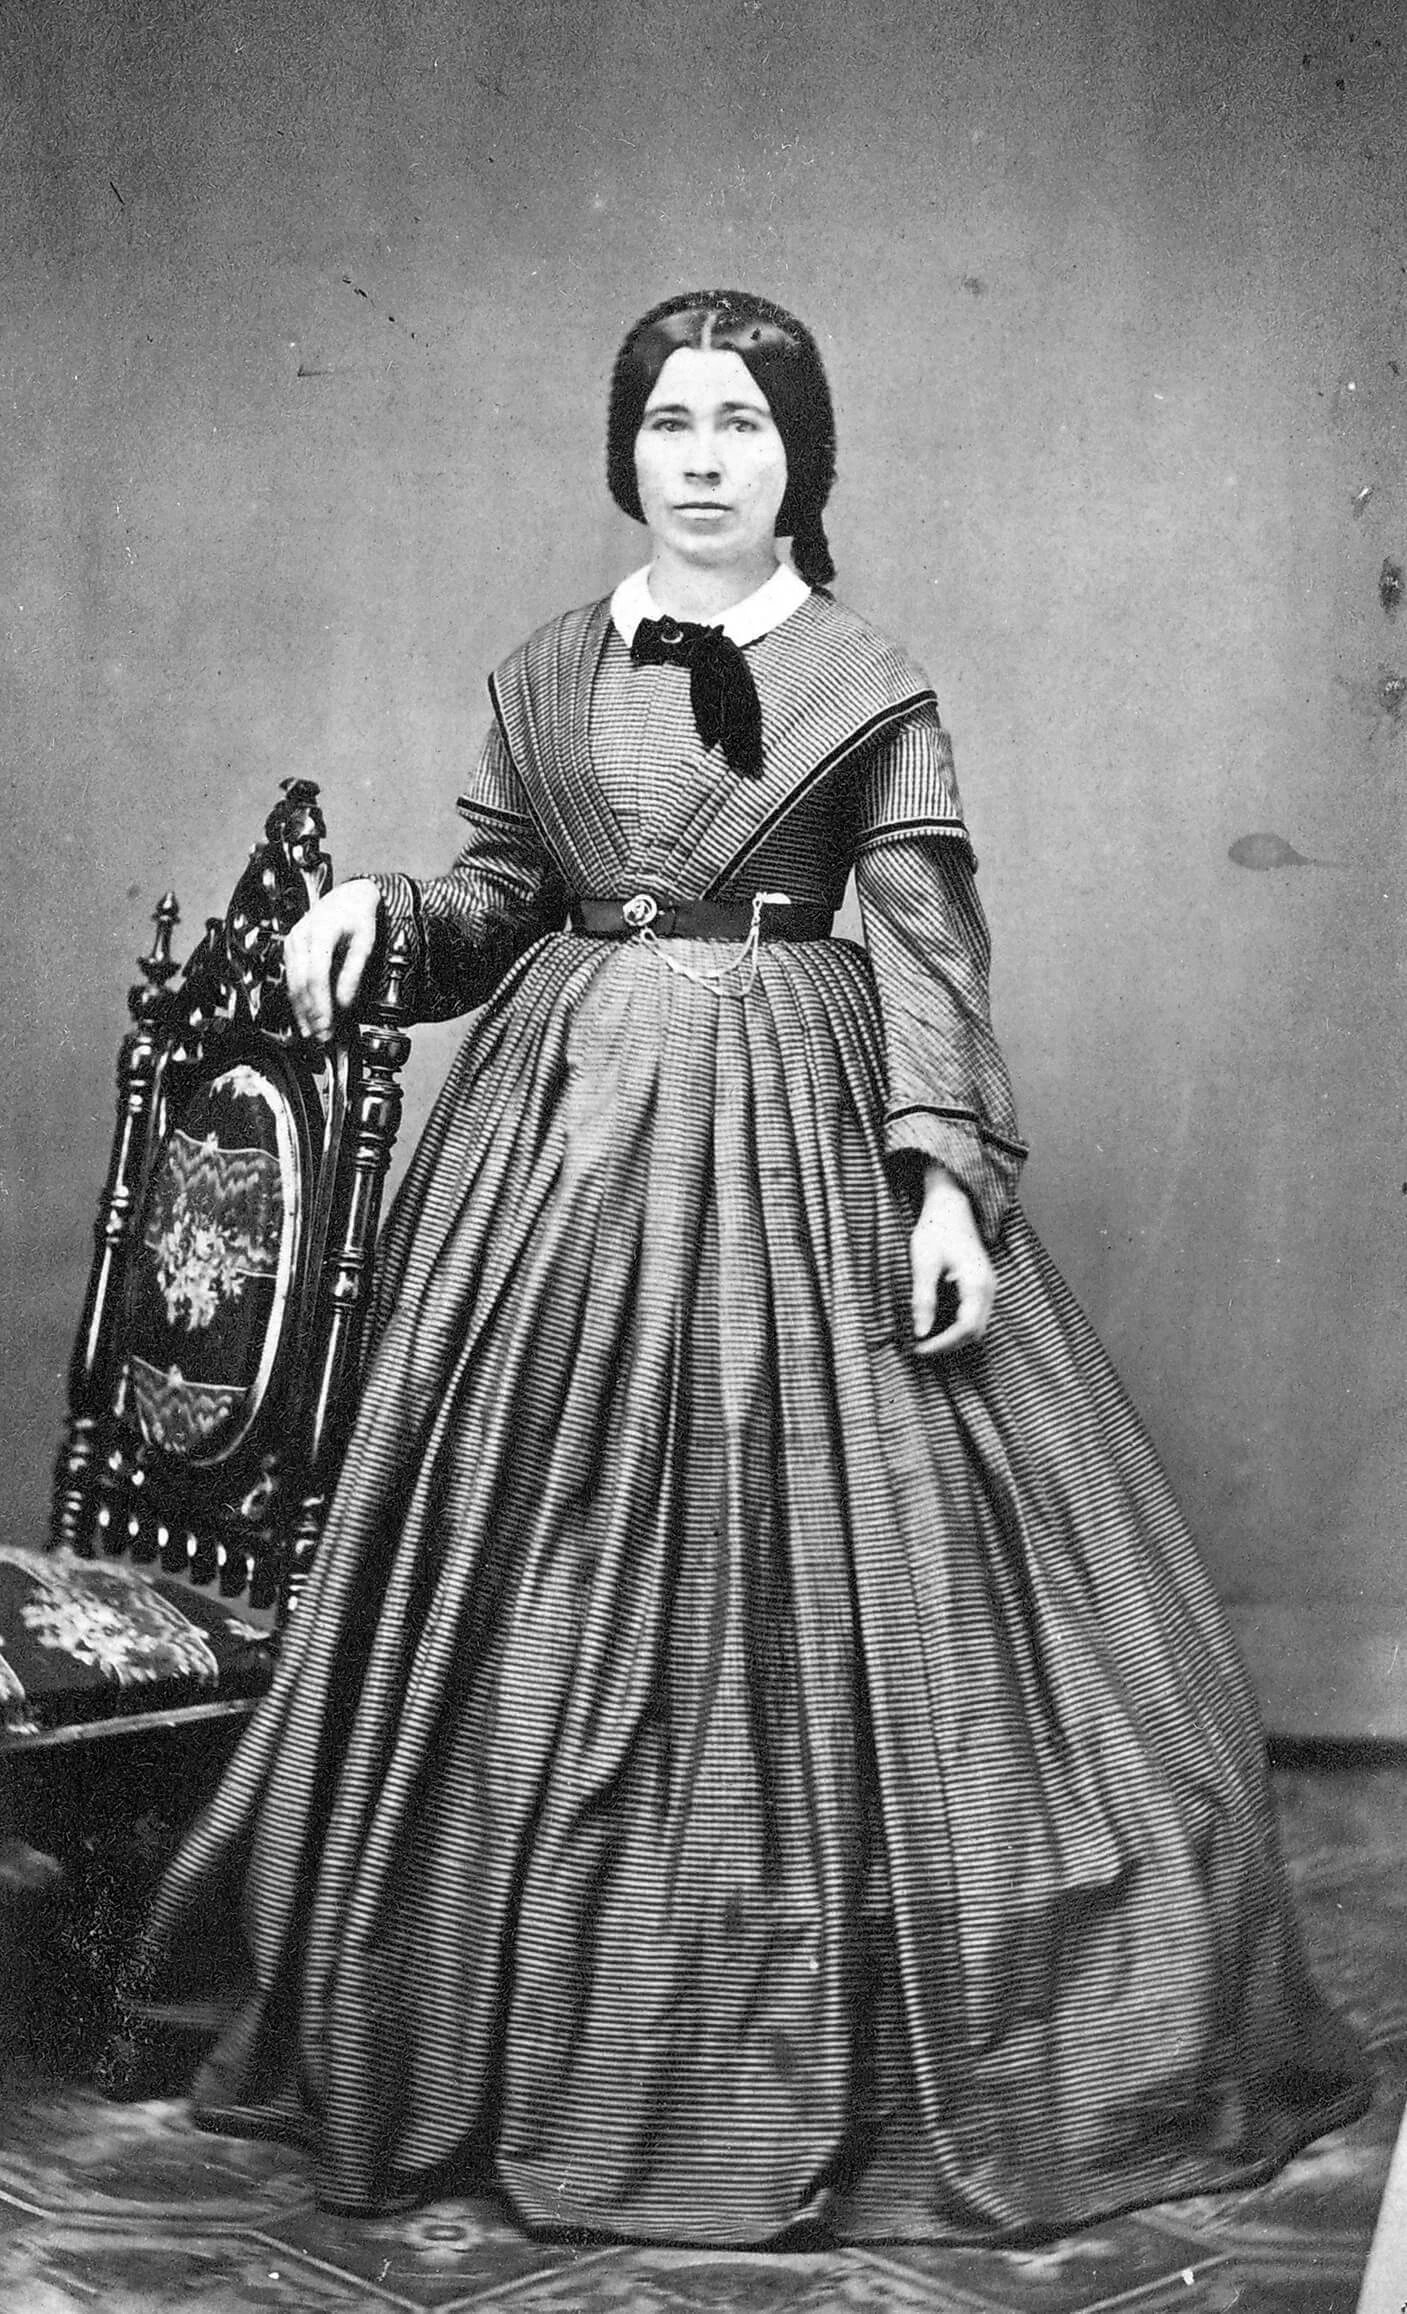 Full-length black and white portrait of a white woman standing in a floor-length dress. The dress is horizontally pin-striped. Her dark hair is parted down the middle and her arm is resting on a tall chair.